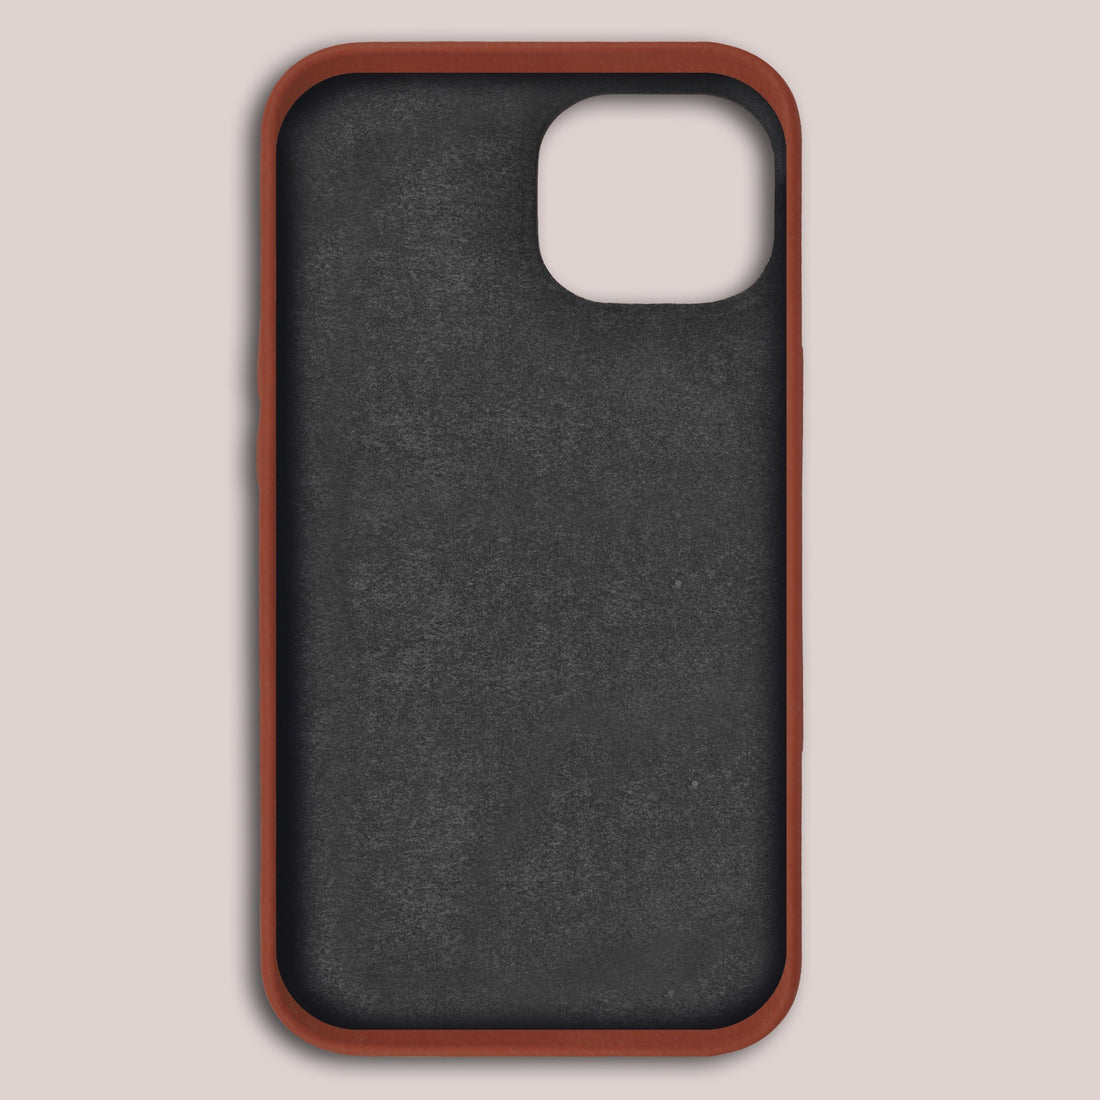 Baxter Card Case for iPhone 13 Pro - Onyx Black